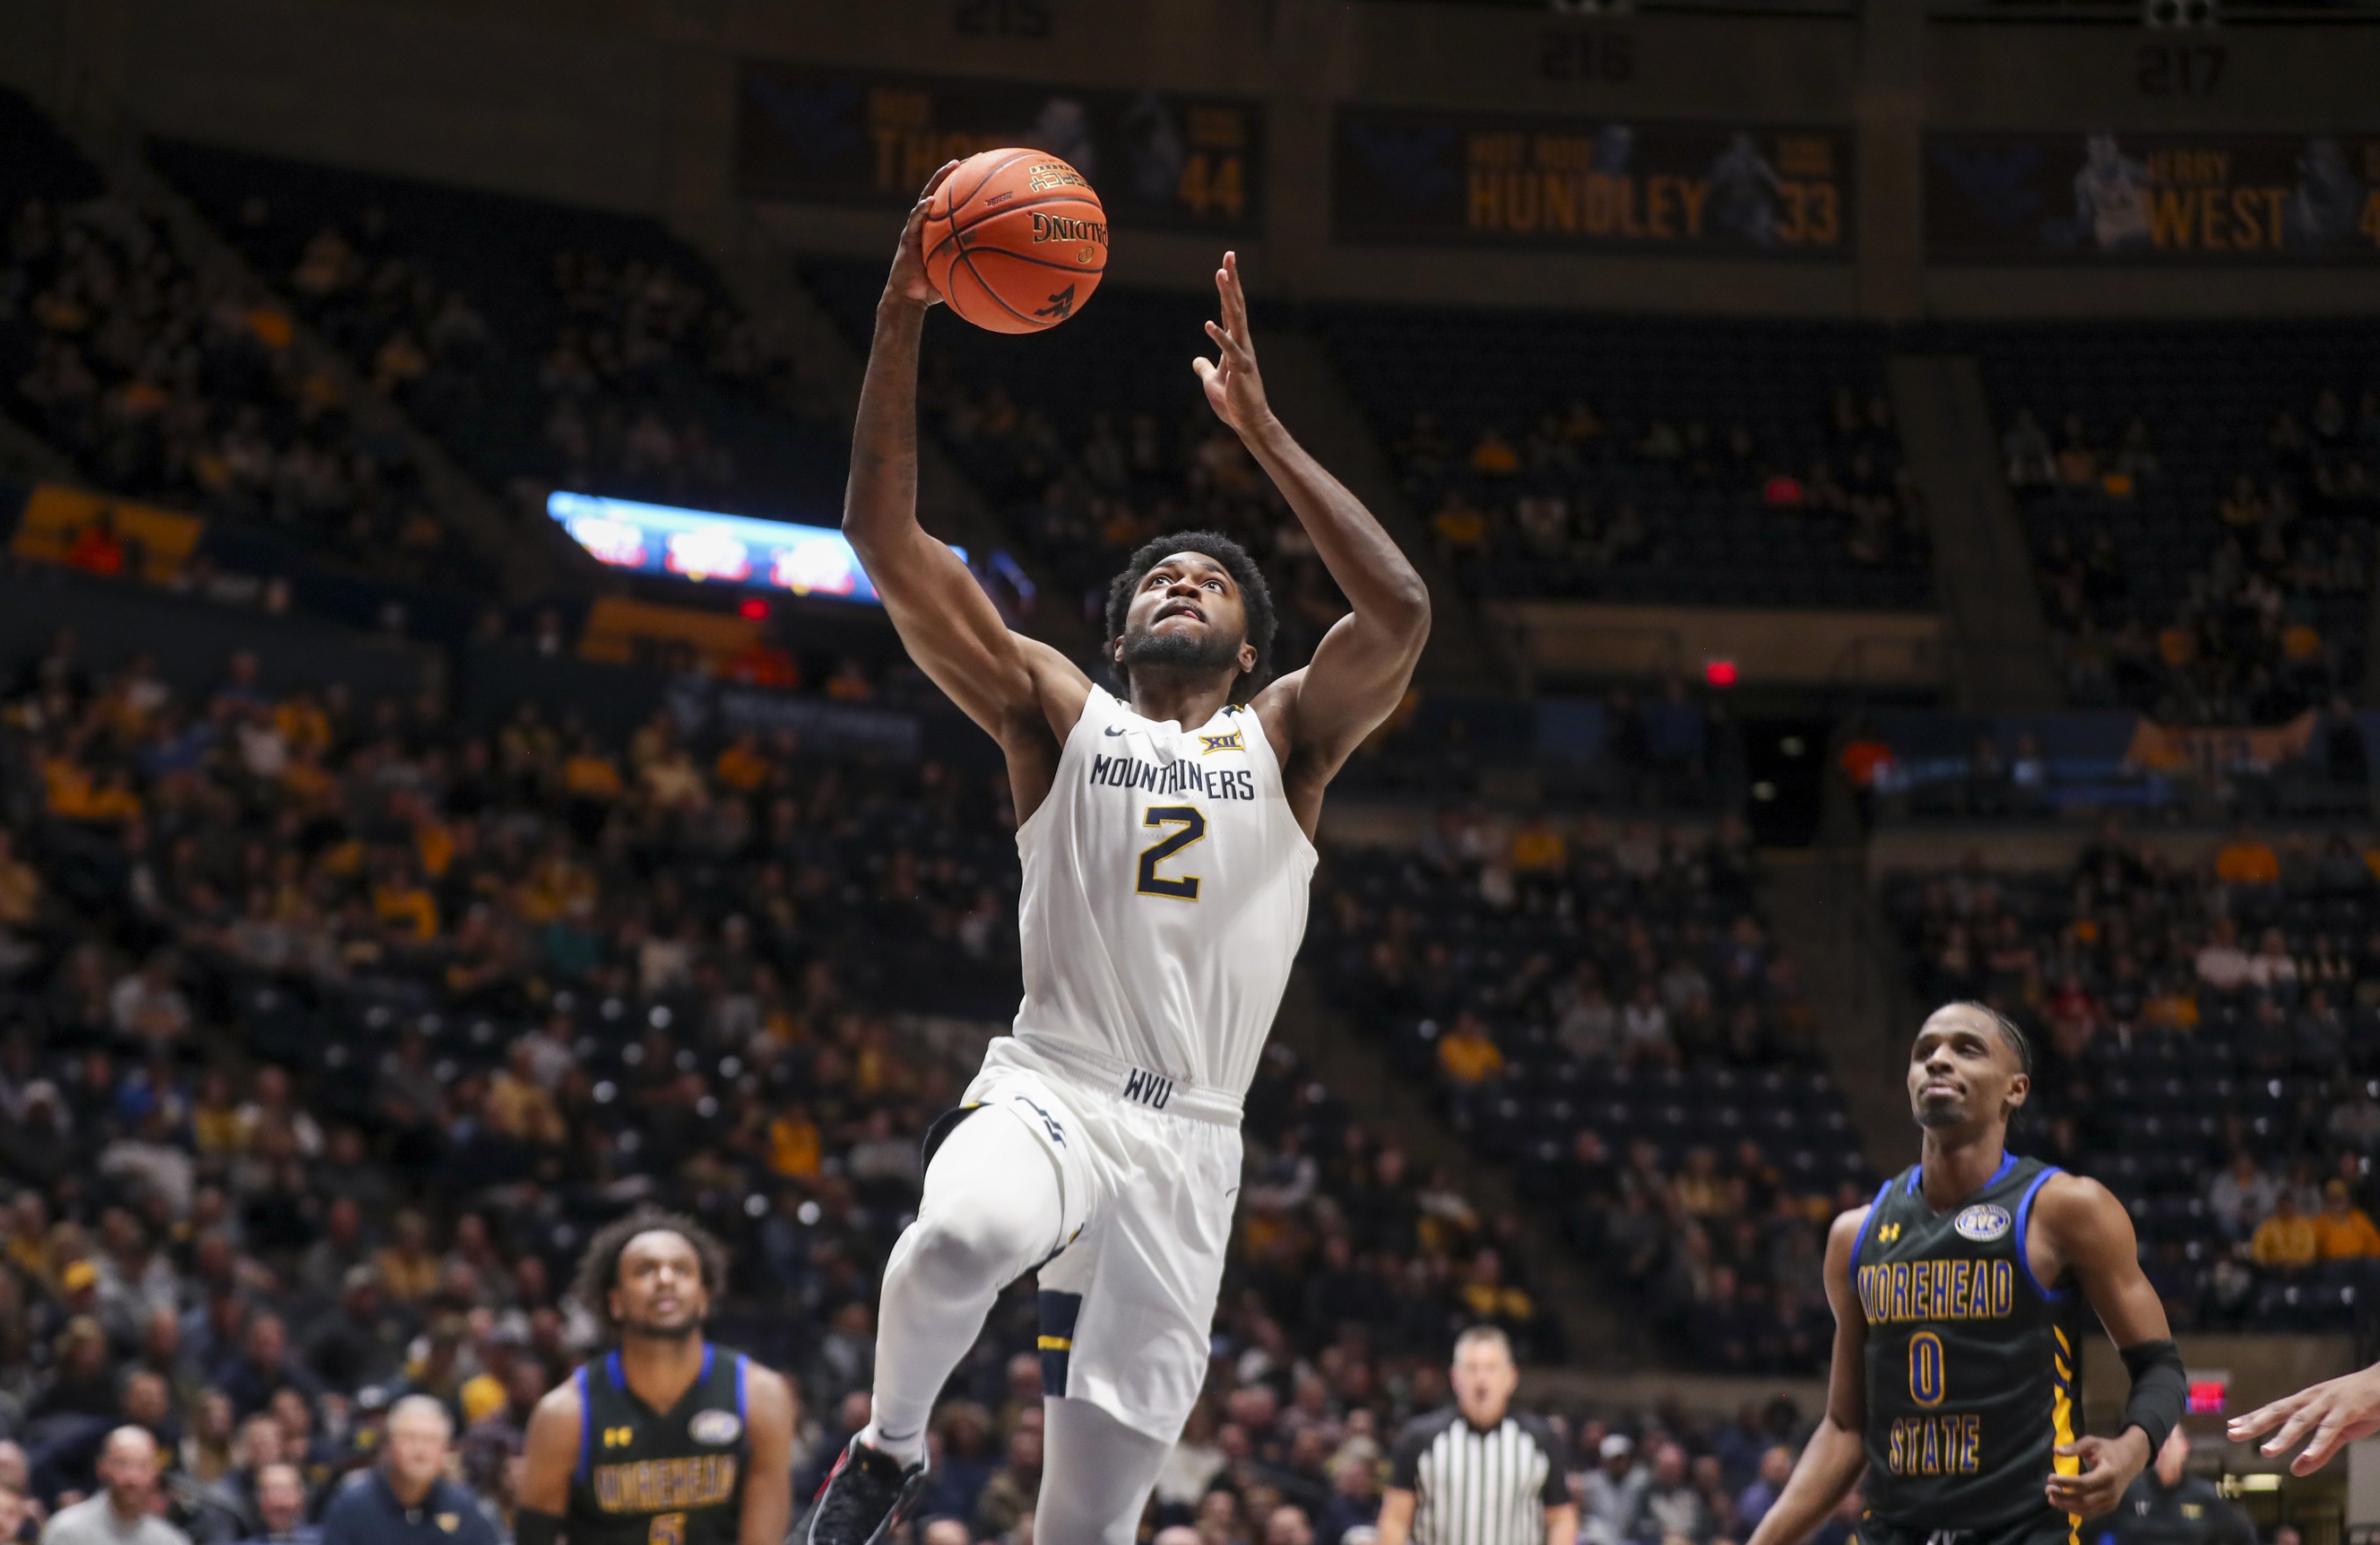 How to Watch, Listen, & Receive LIVE Updates of WVU at Oklahoma State